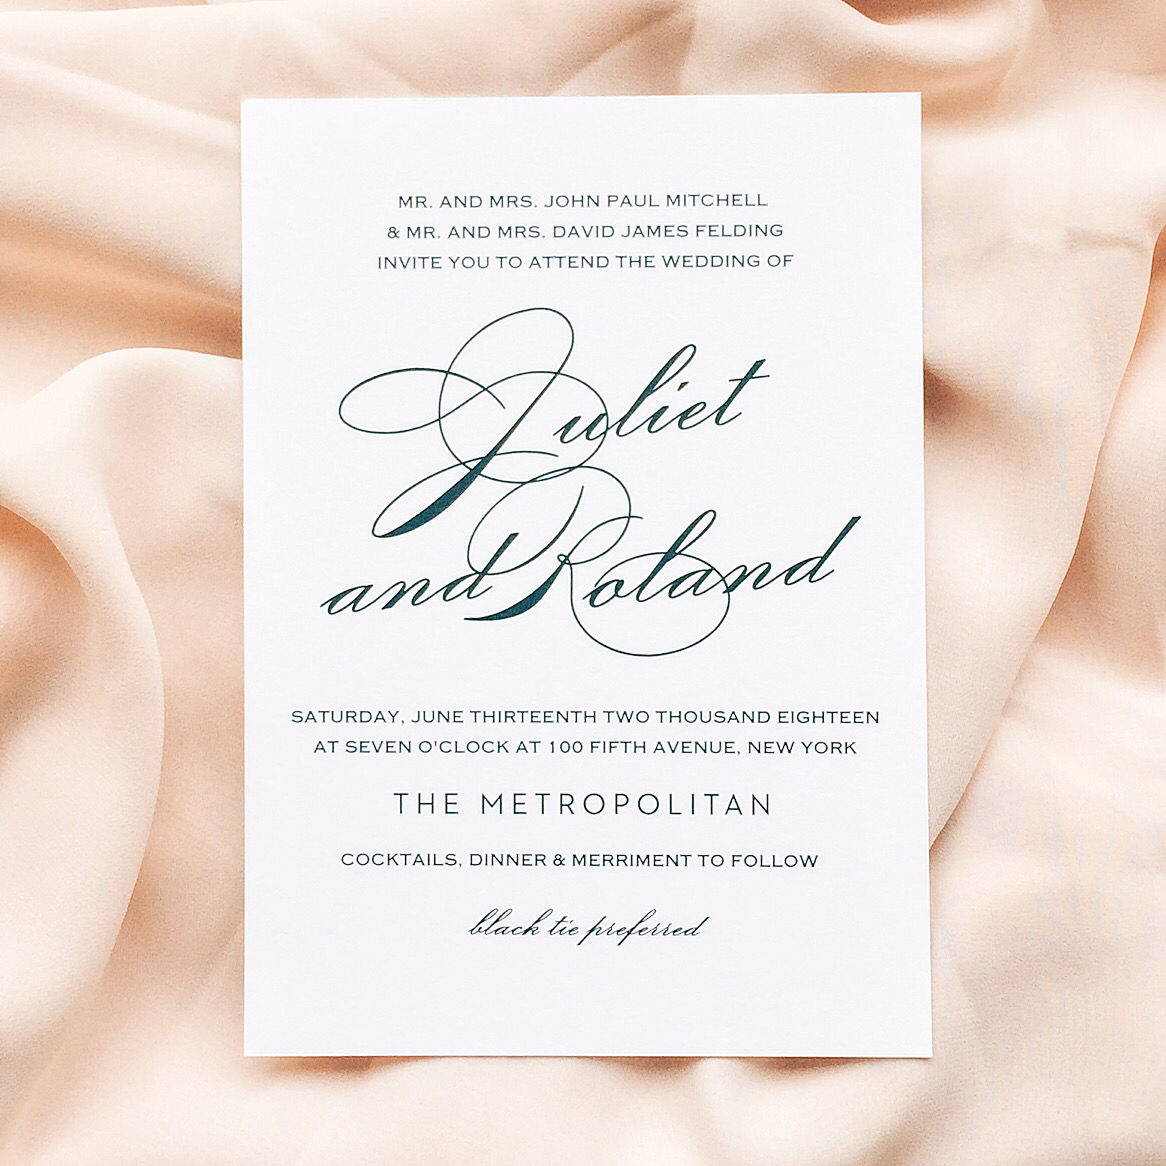 white wedding invitation with black calligraphy lays on a soft pink cloth